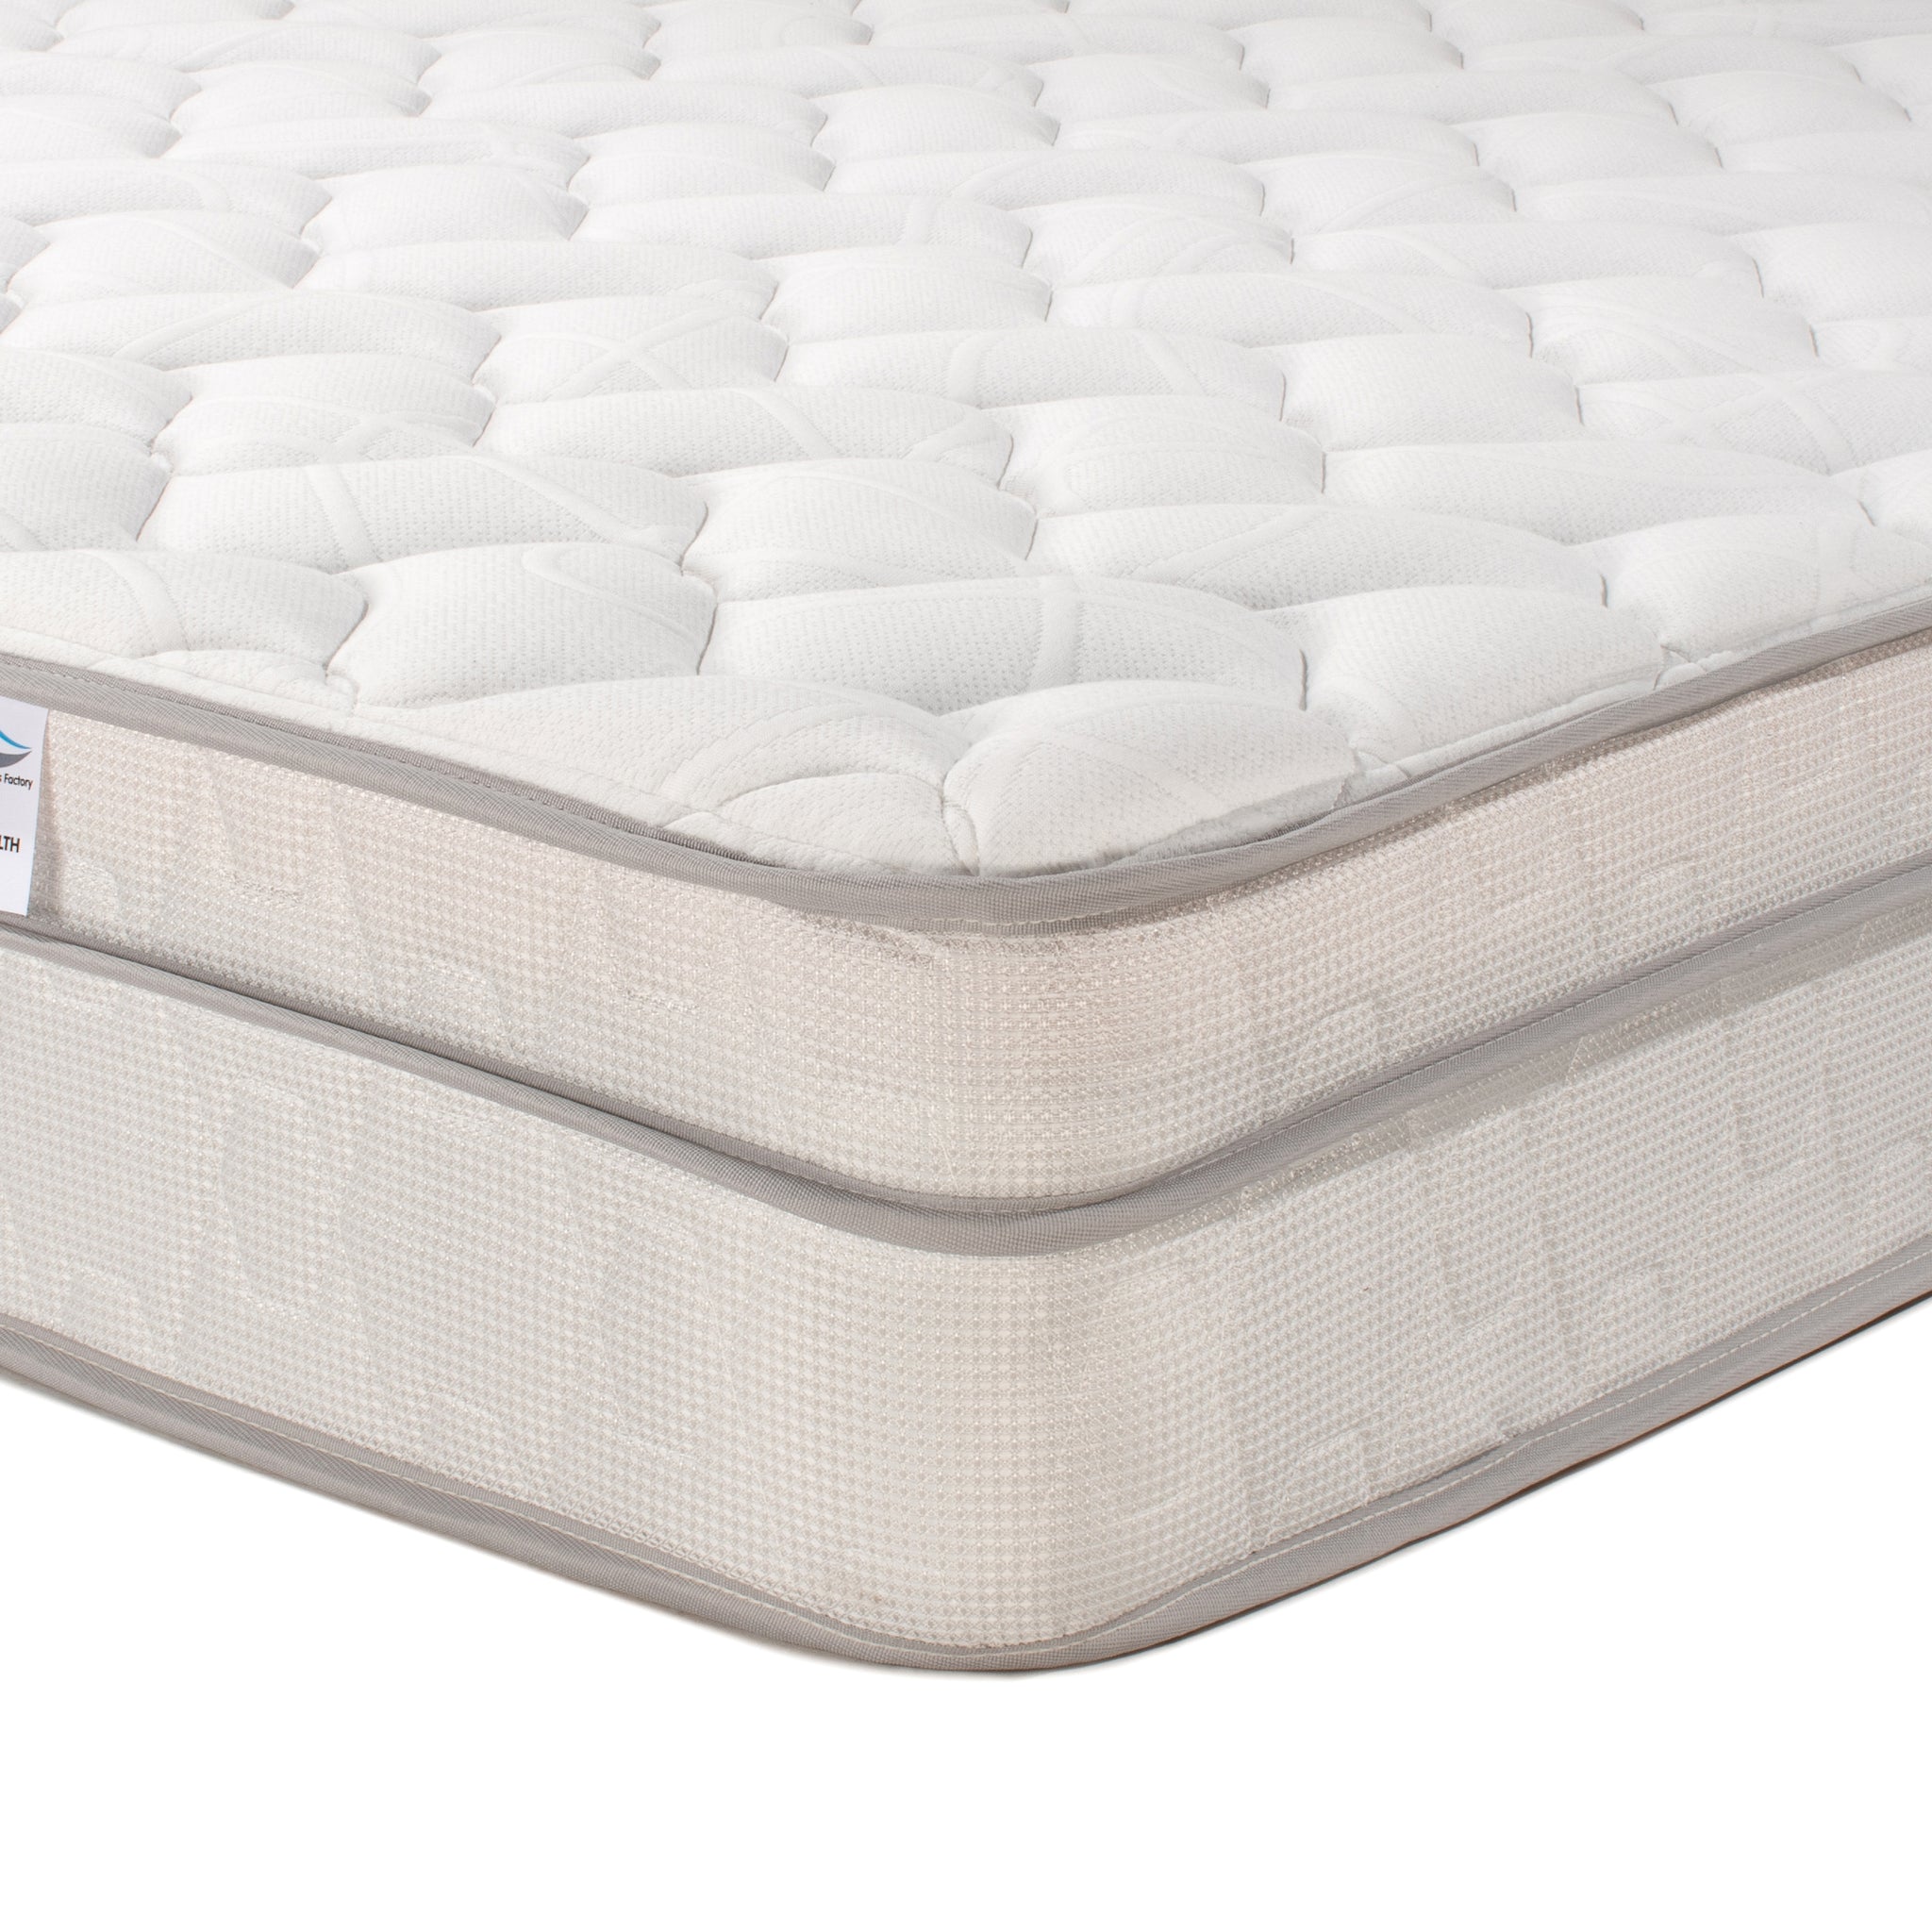 Chiro Health King Size Innerspring Mattress - Australian Made - 5 Year Warranty - Free Delivery - Melbourne Mattress Factory